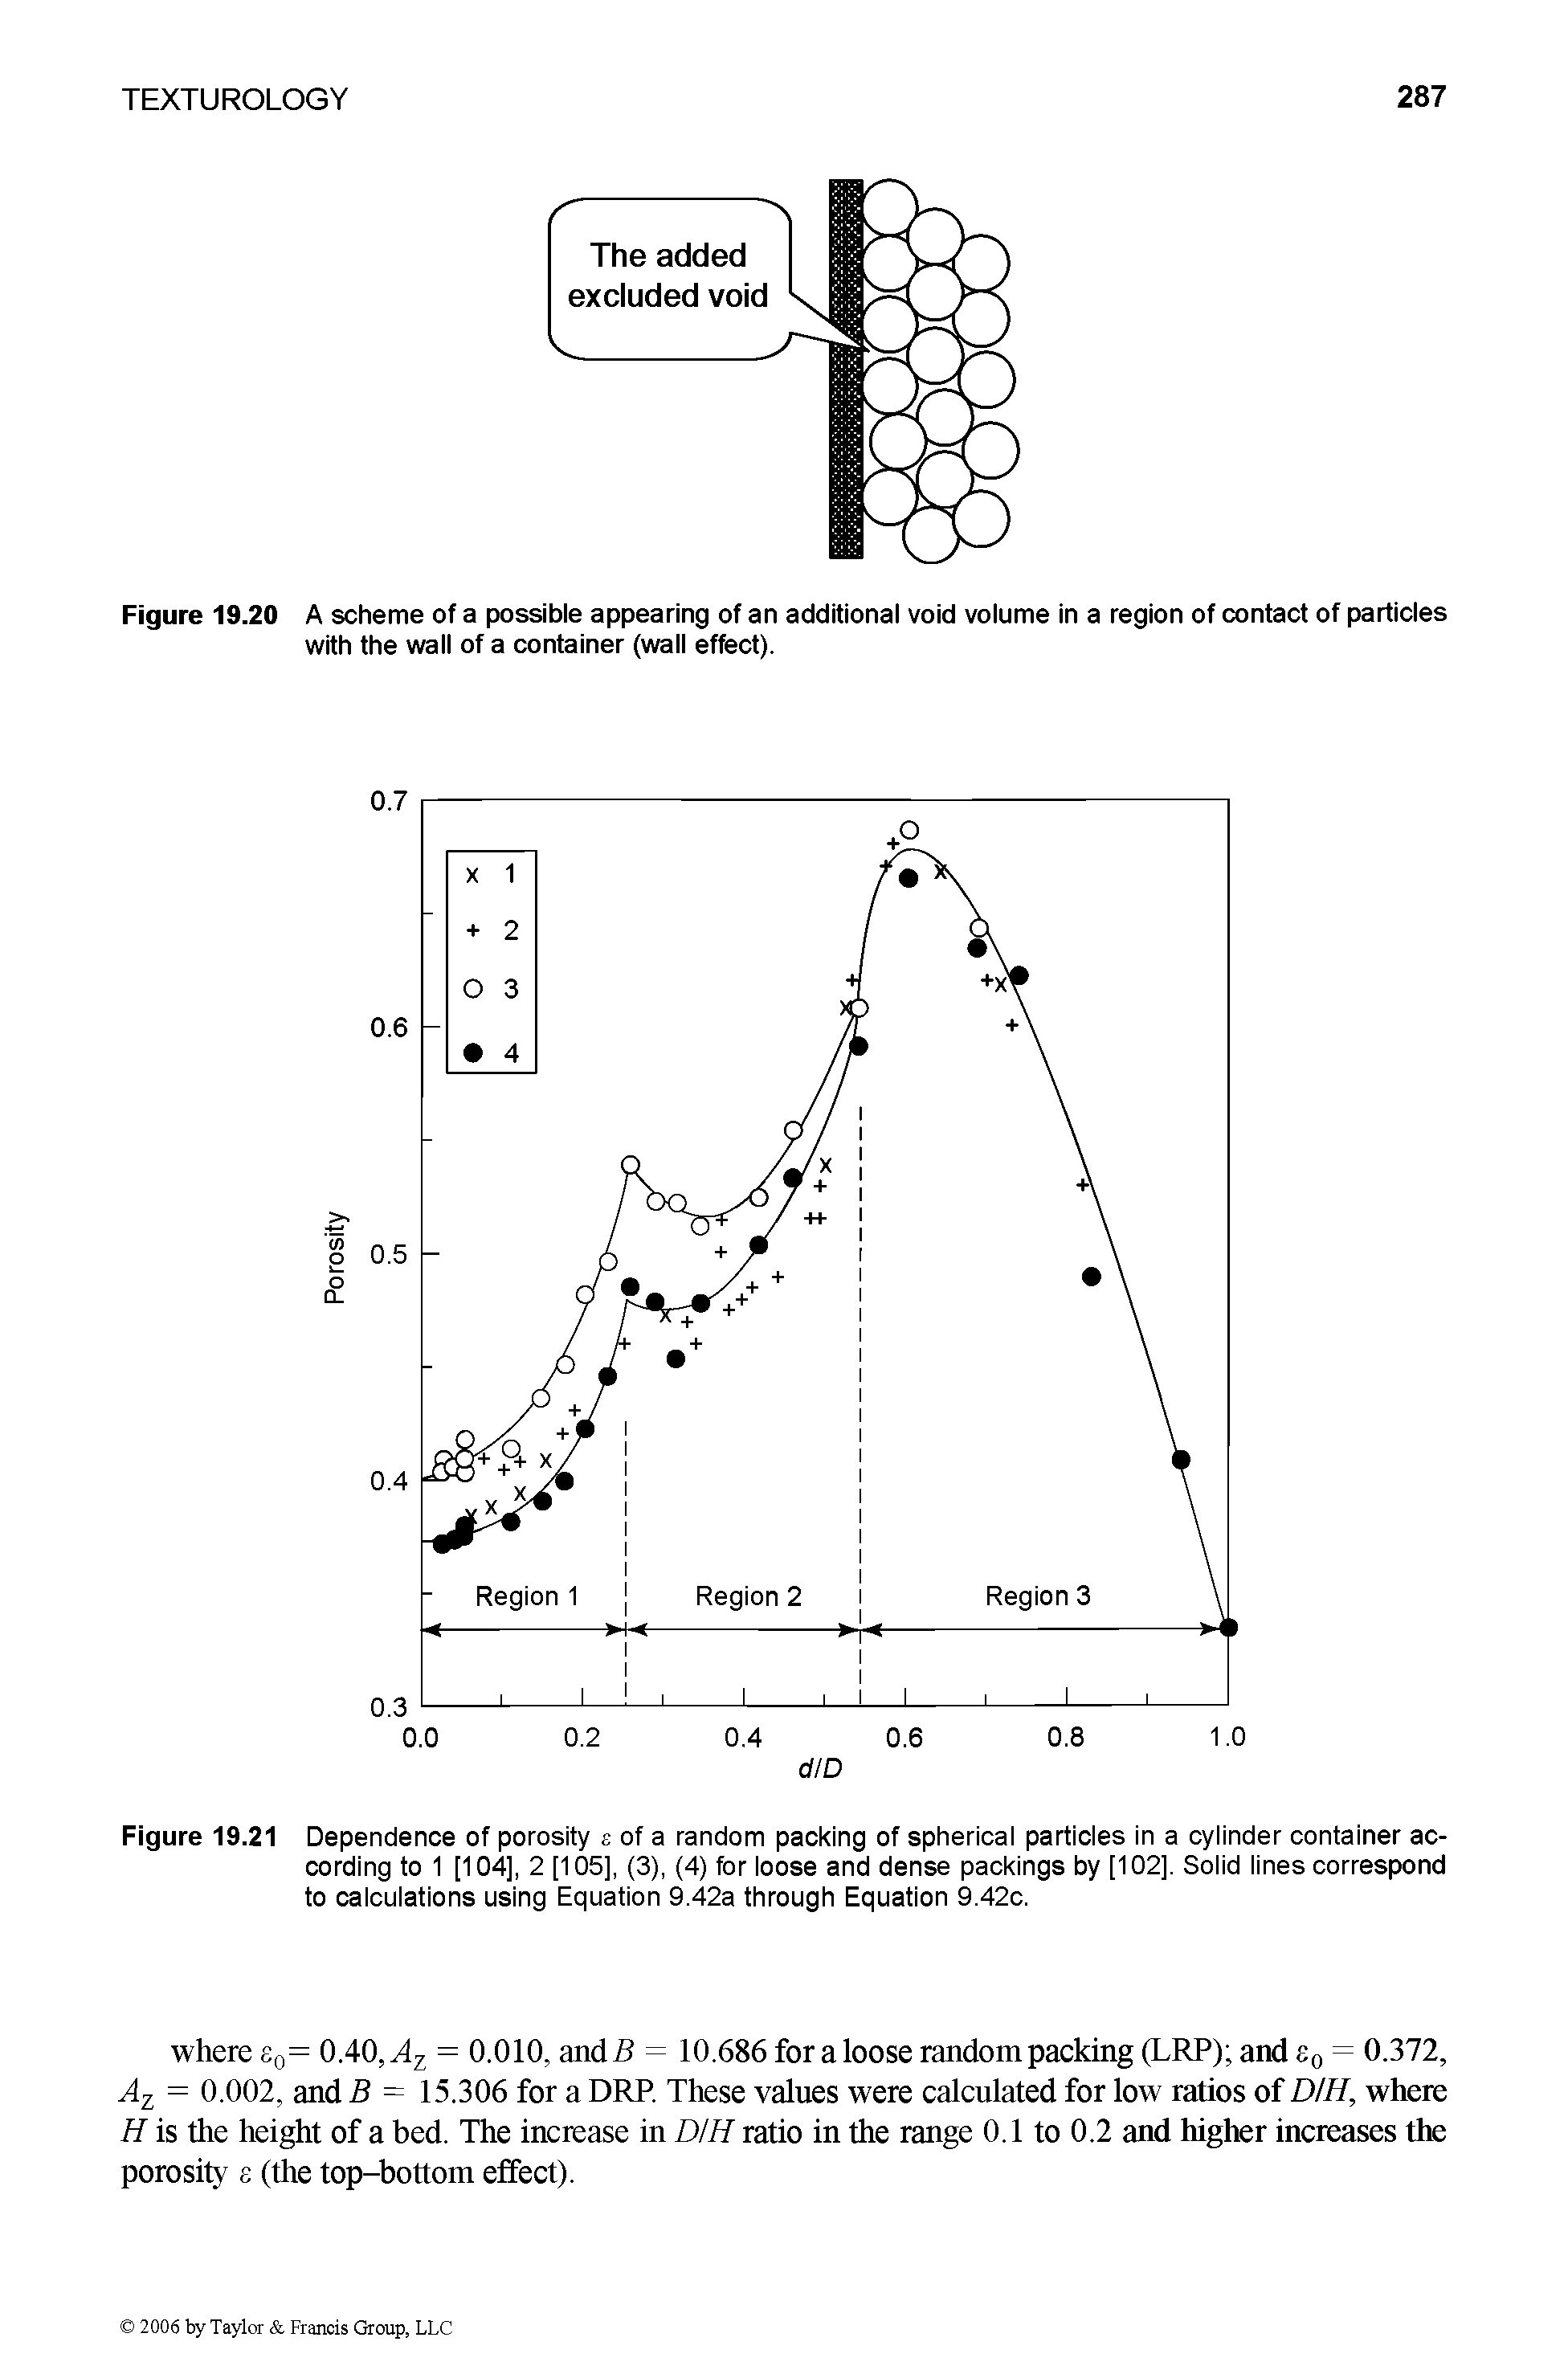 Figure 19.20 A scheme of a possible appearing of an additional void volume in a region of contact of particles with the wall of a container (wall effect).